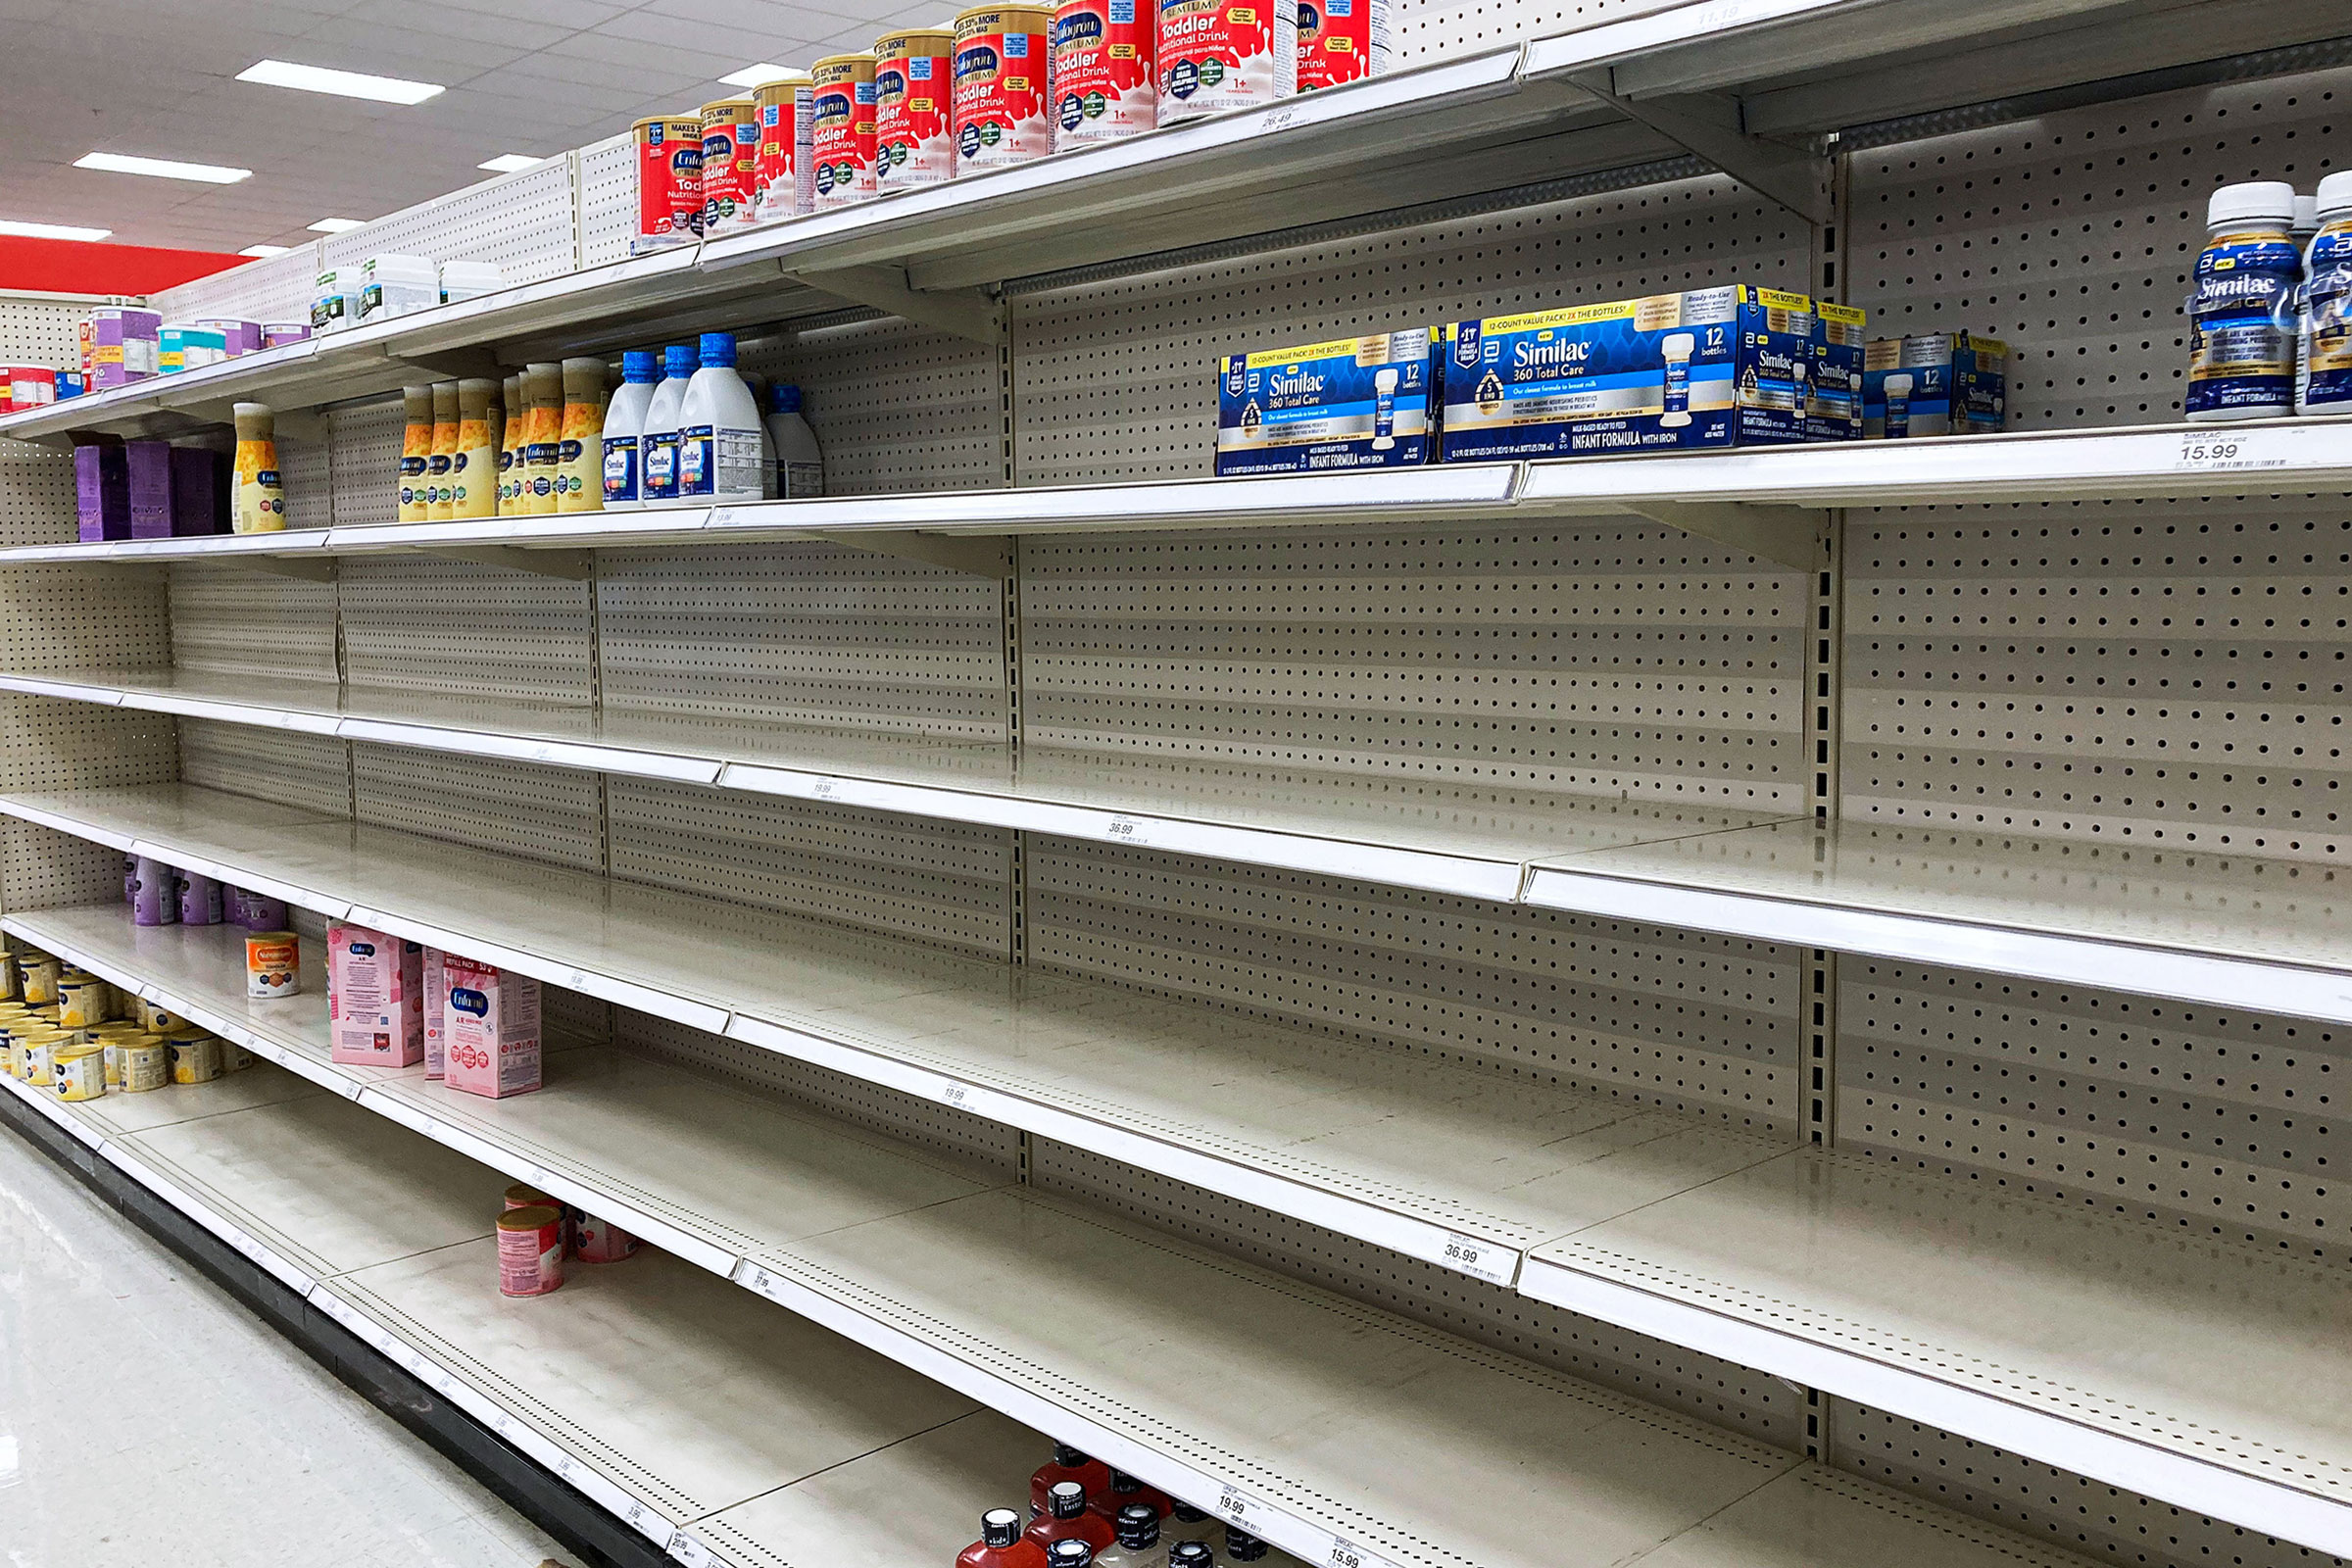 A nearly empty baby formula display shelf is seen at a Target store in Orlando, May 8, 2022. (Paul Hennessy—SOPA Images/Shutterstock)